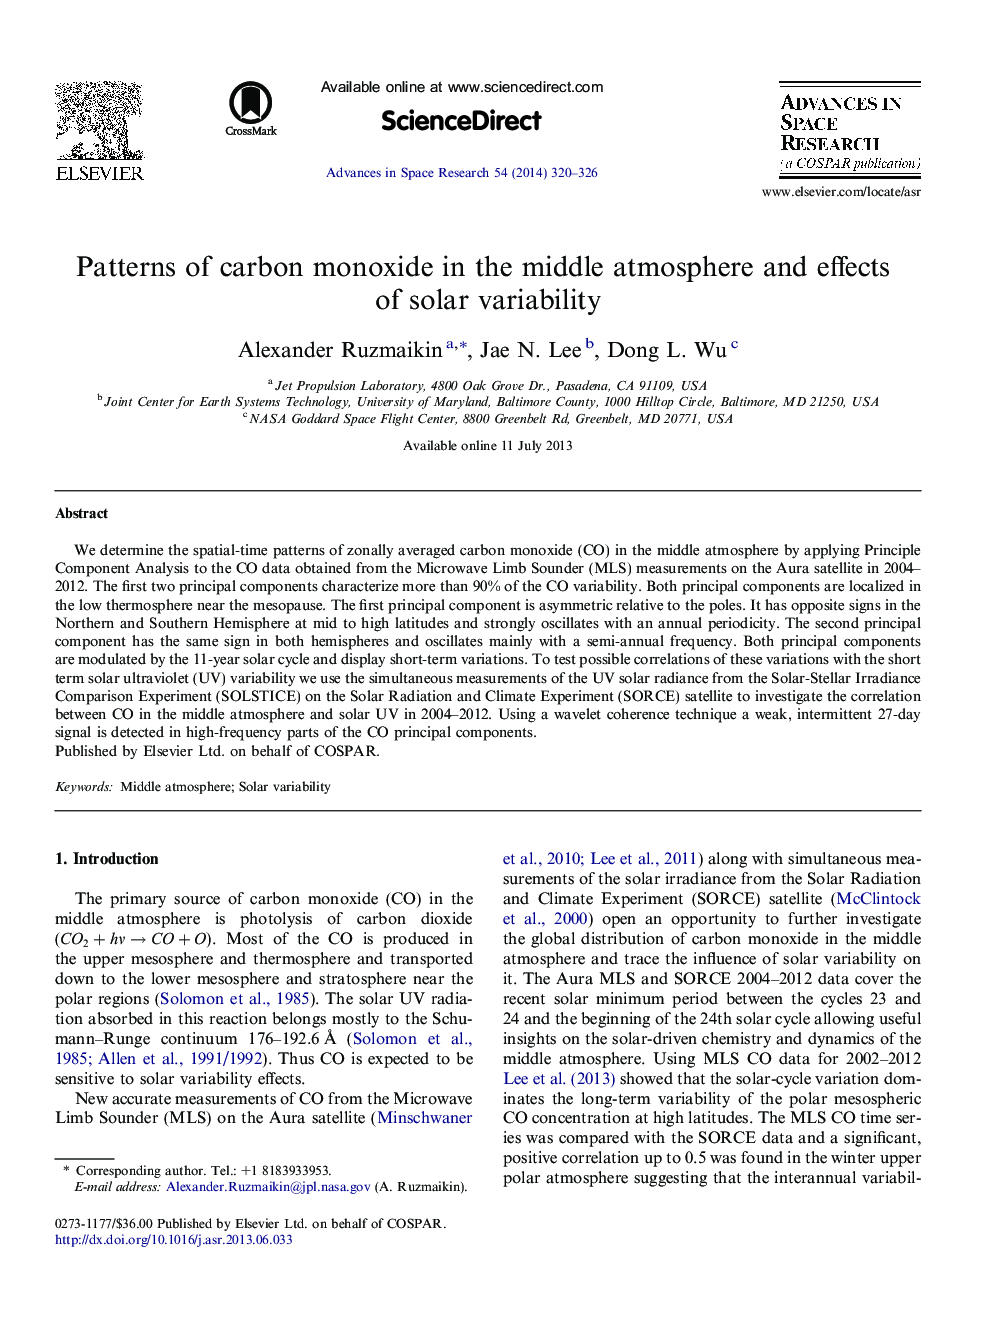 Patterns of carbon monoxide in the middle atmosphere and effects of solar variability